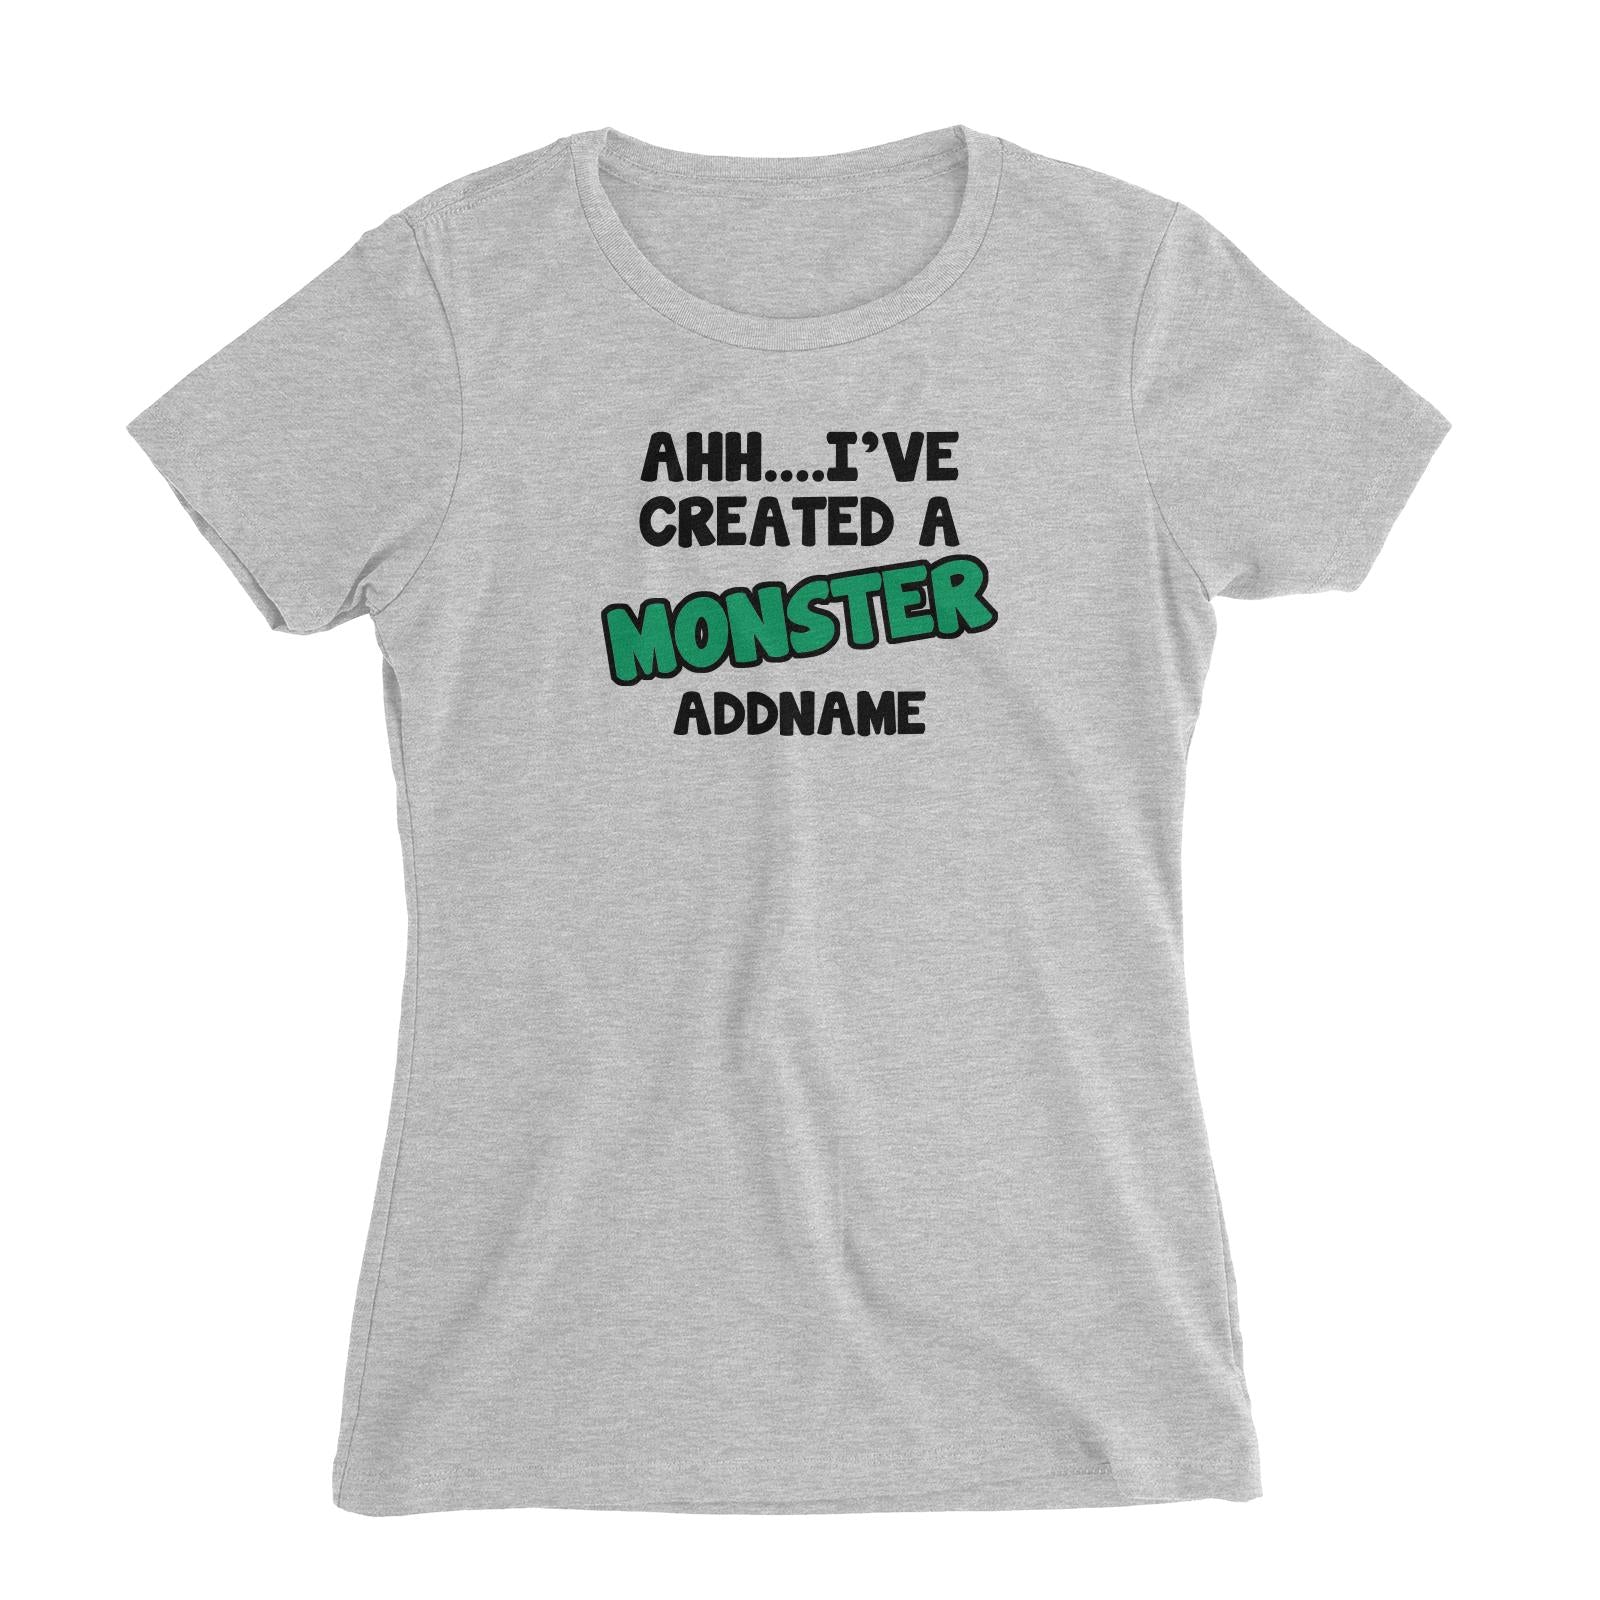 Ahh Ive Created a Monster Women's Slim Fit T-Shirt